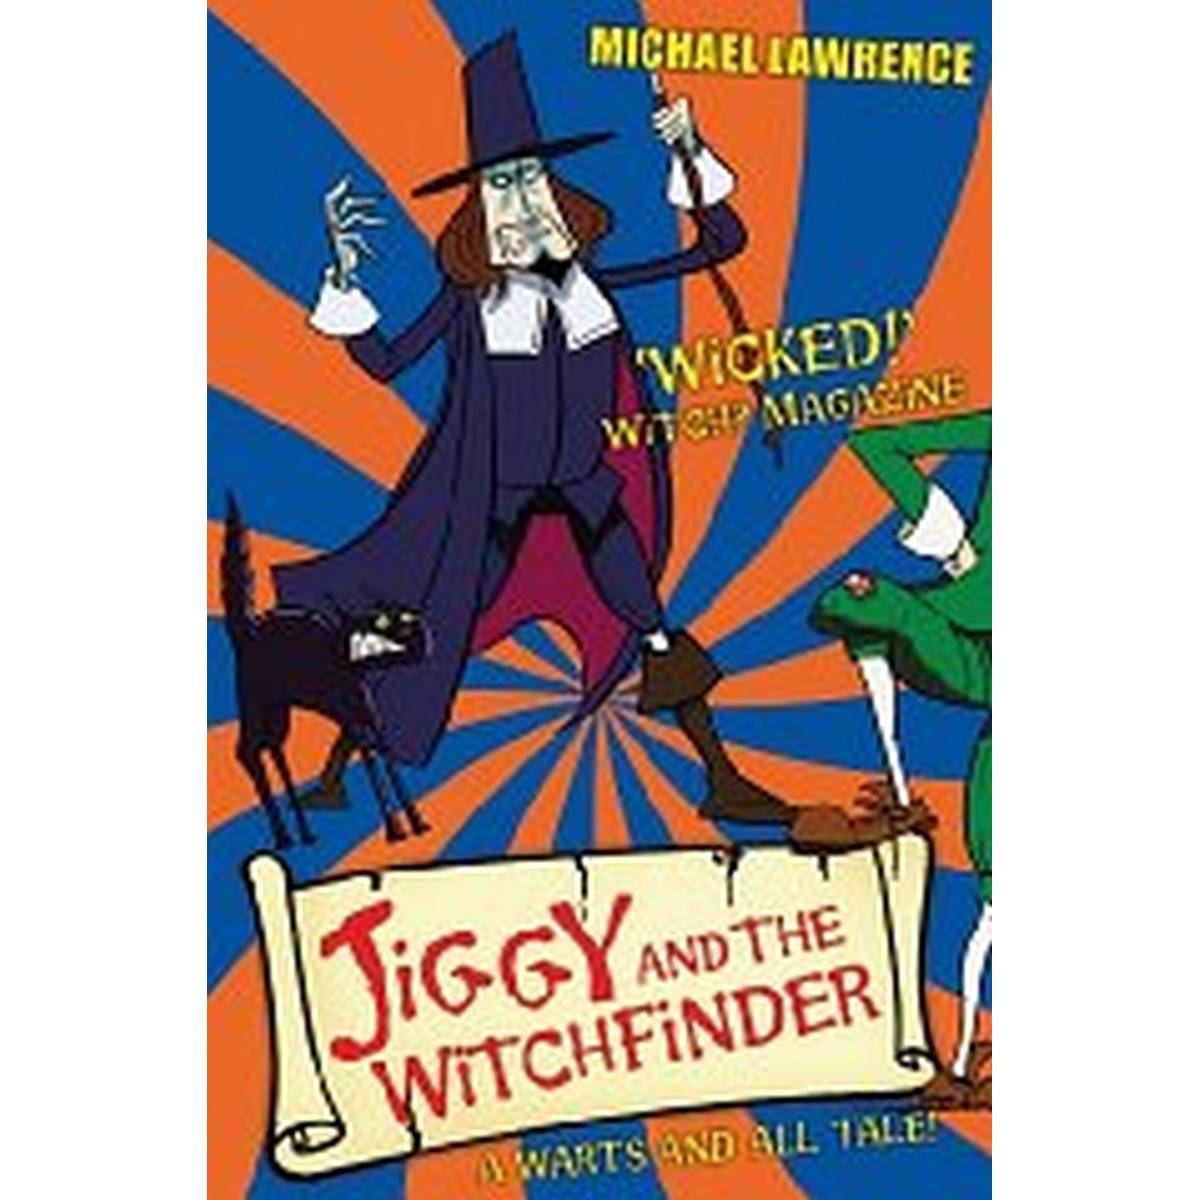 Jiggy and the Witchfinder (Jiggy McCue)